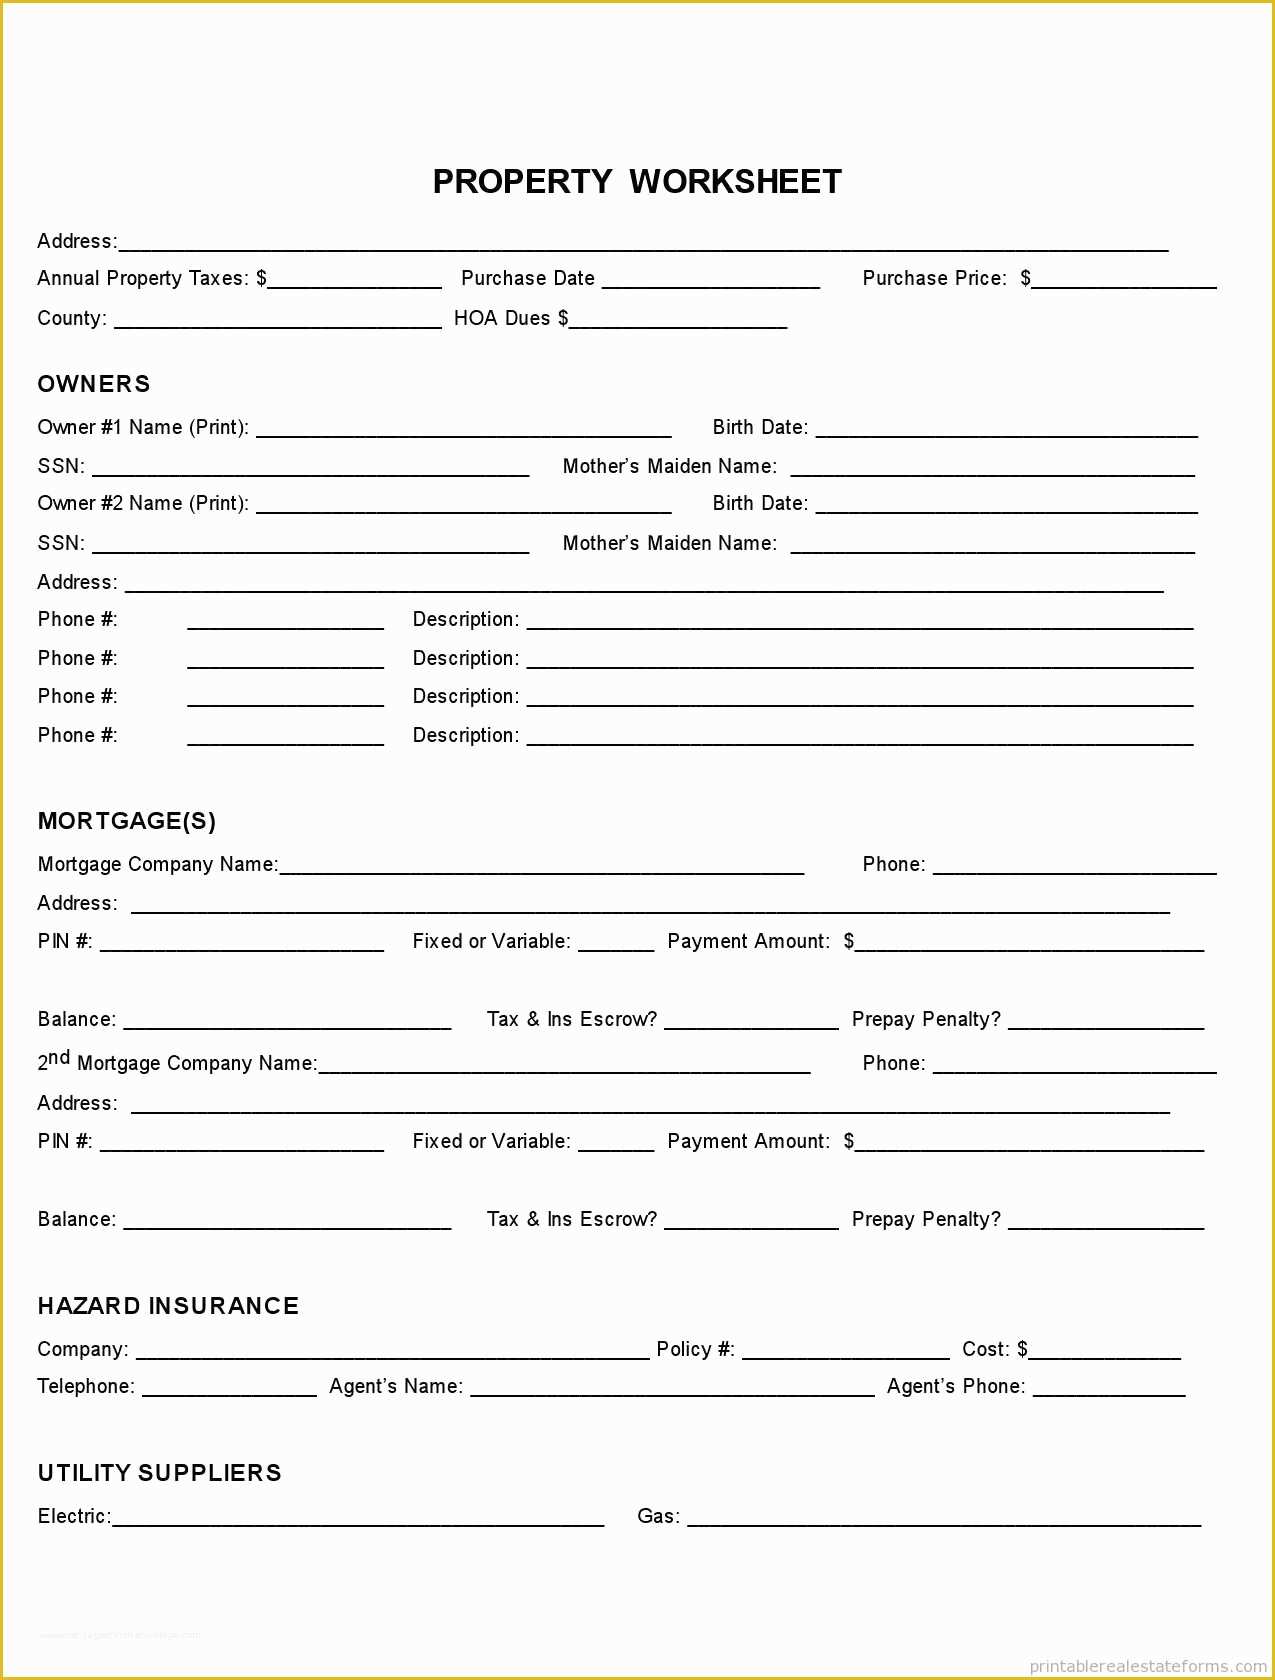 Google forms Templates Free Of Various Collection order form Template Google